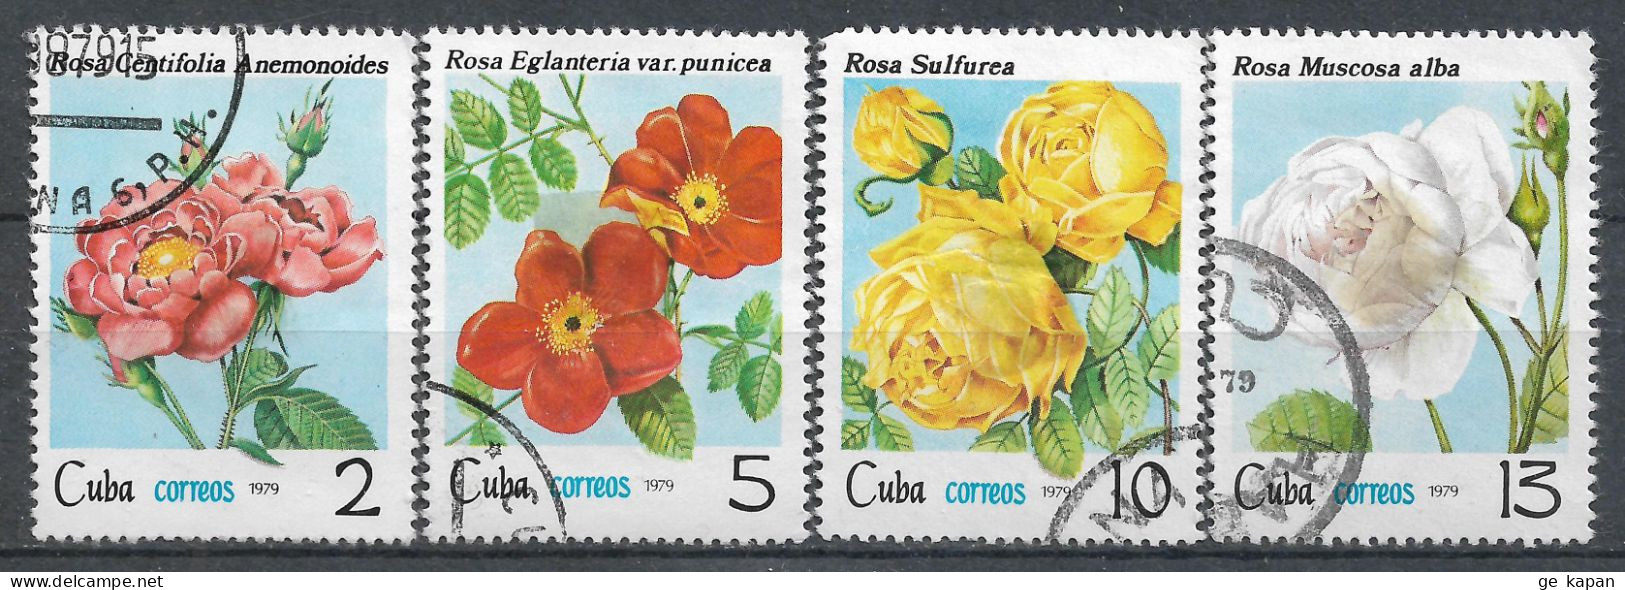 1979 CUBA Set Of 4 Used Stamps (Michel # 2420,2422-2424) CV €1.20 - Gebraucht